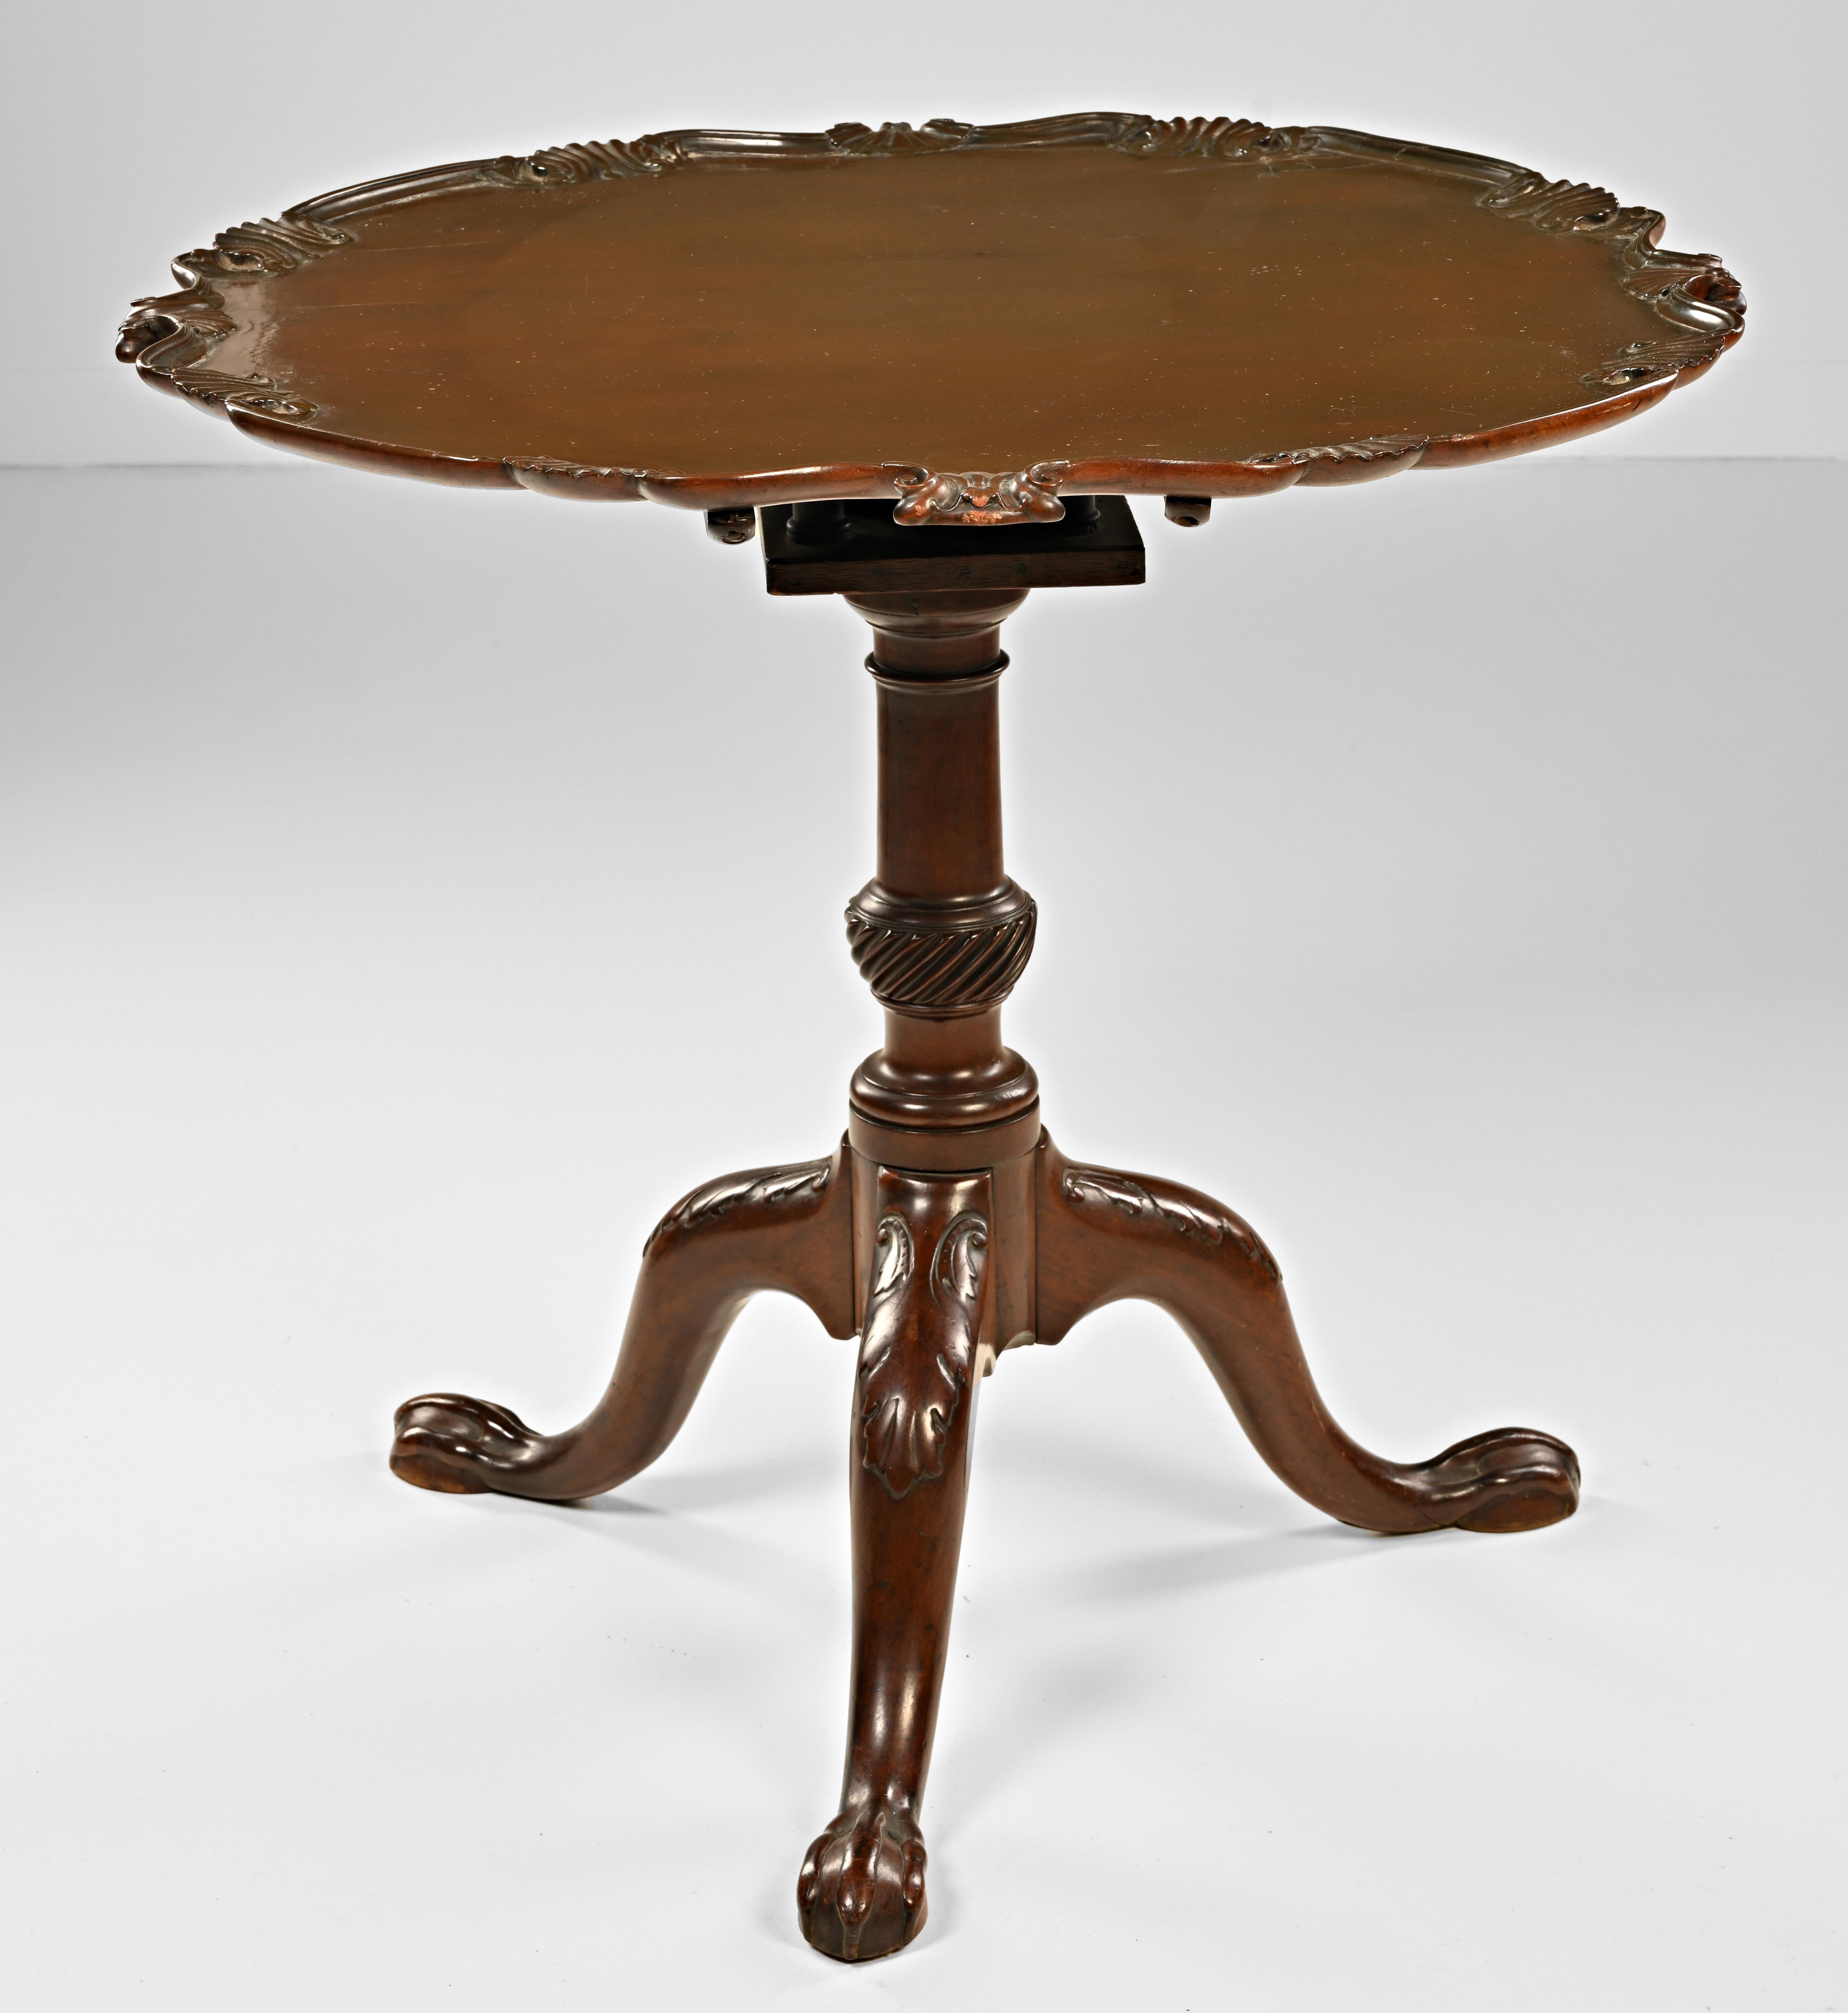 A rare and fine example of an 18th century bird cage pie crust tea table. This piece was deaccessioned from the San Diego Museum of Art and retains its label and inventory numbers. They had this table listed as American and from Newport. It is